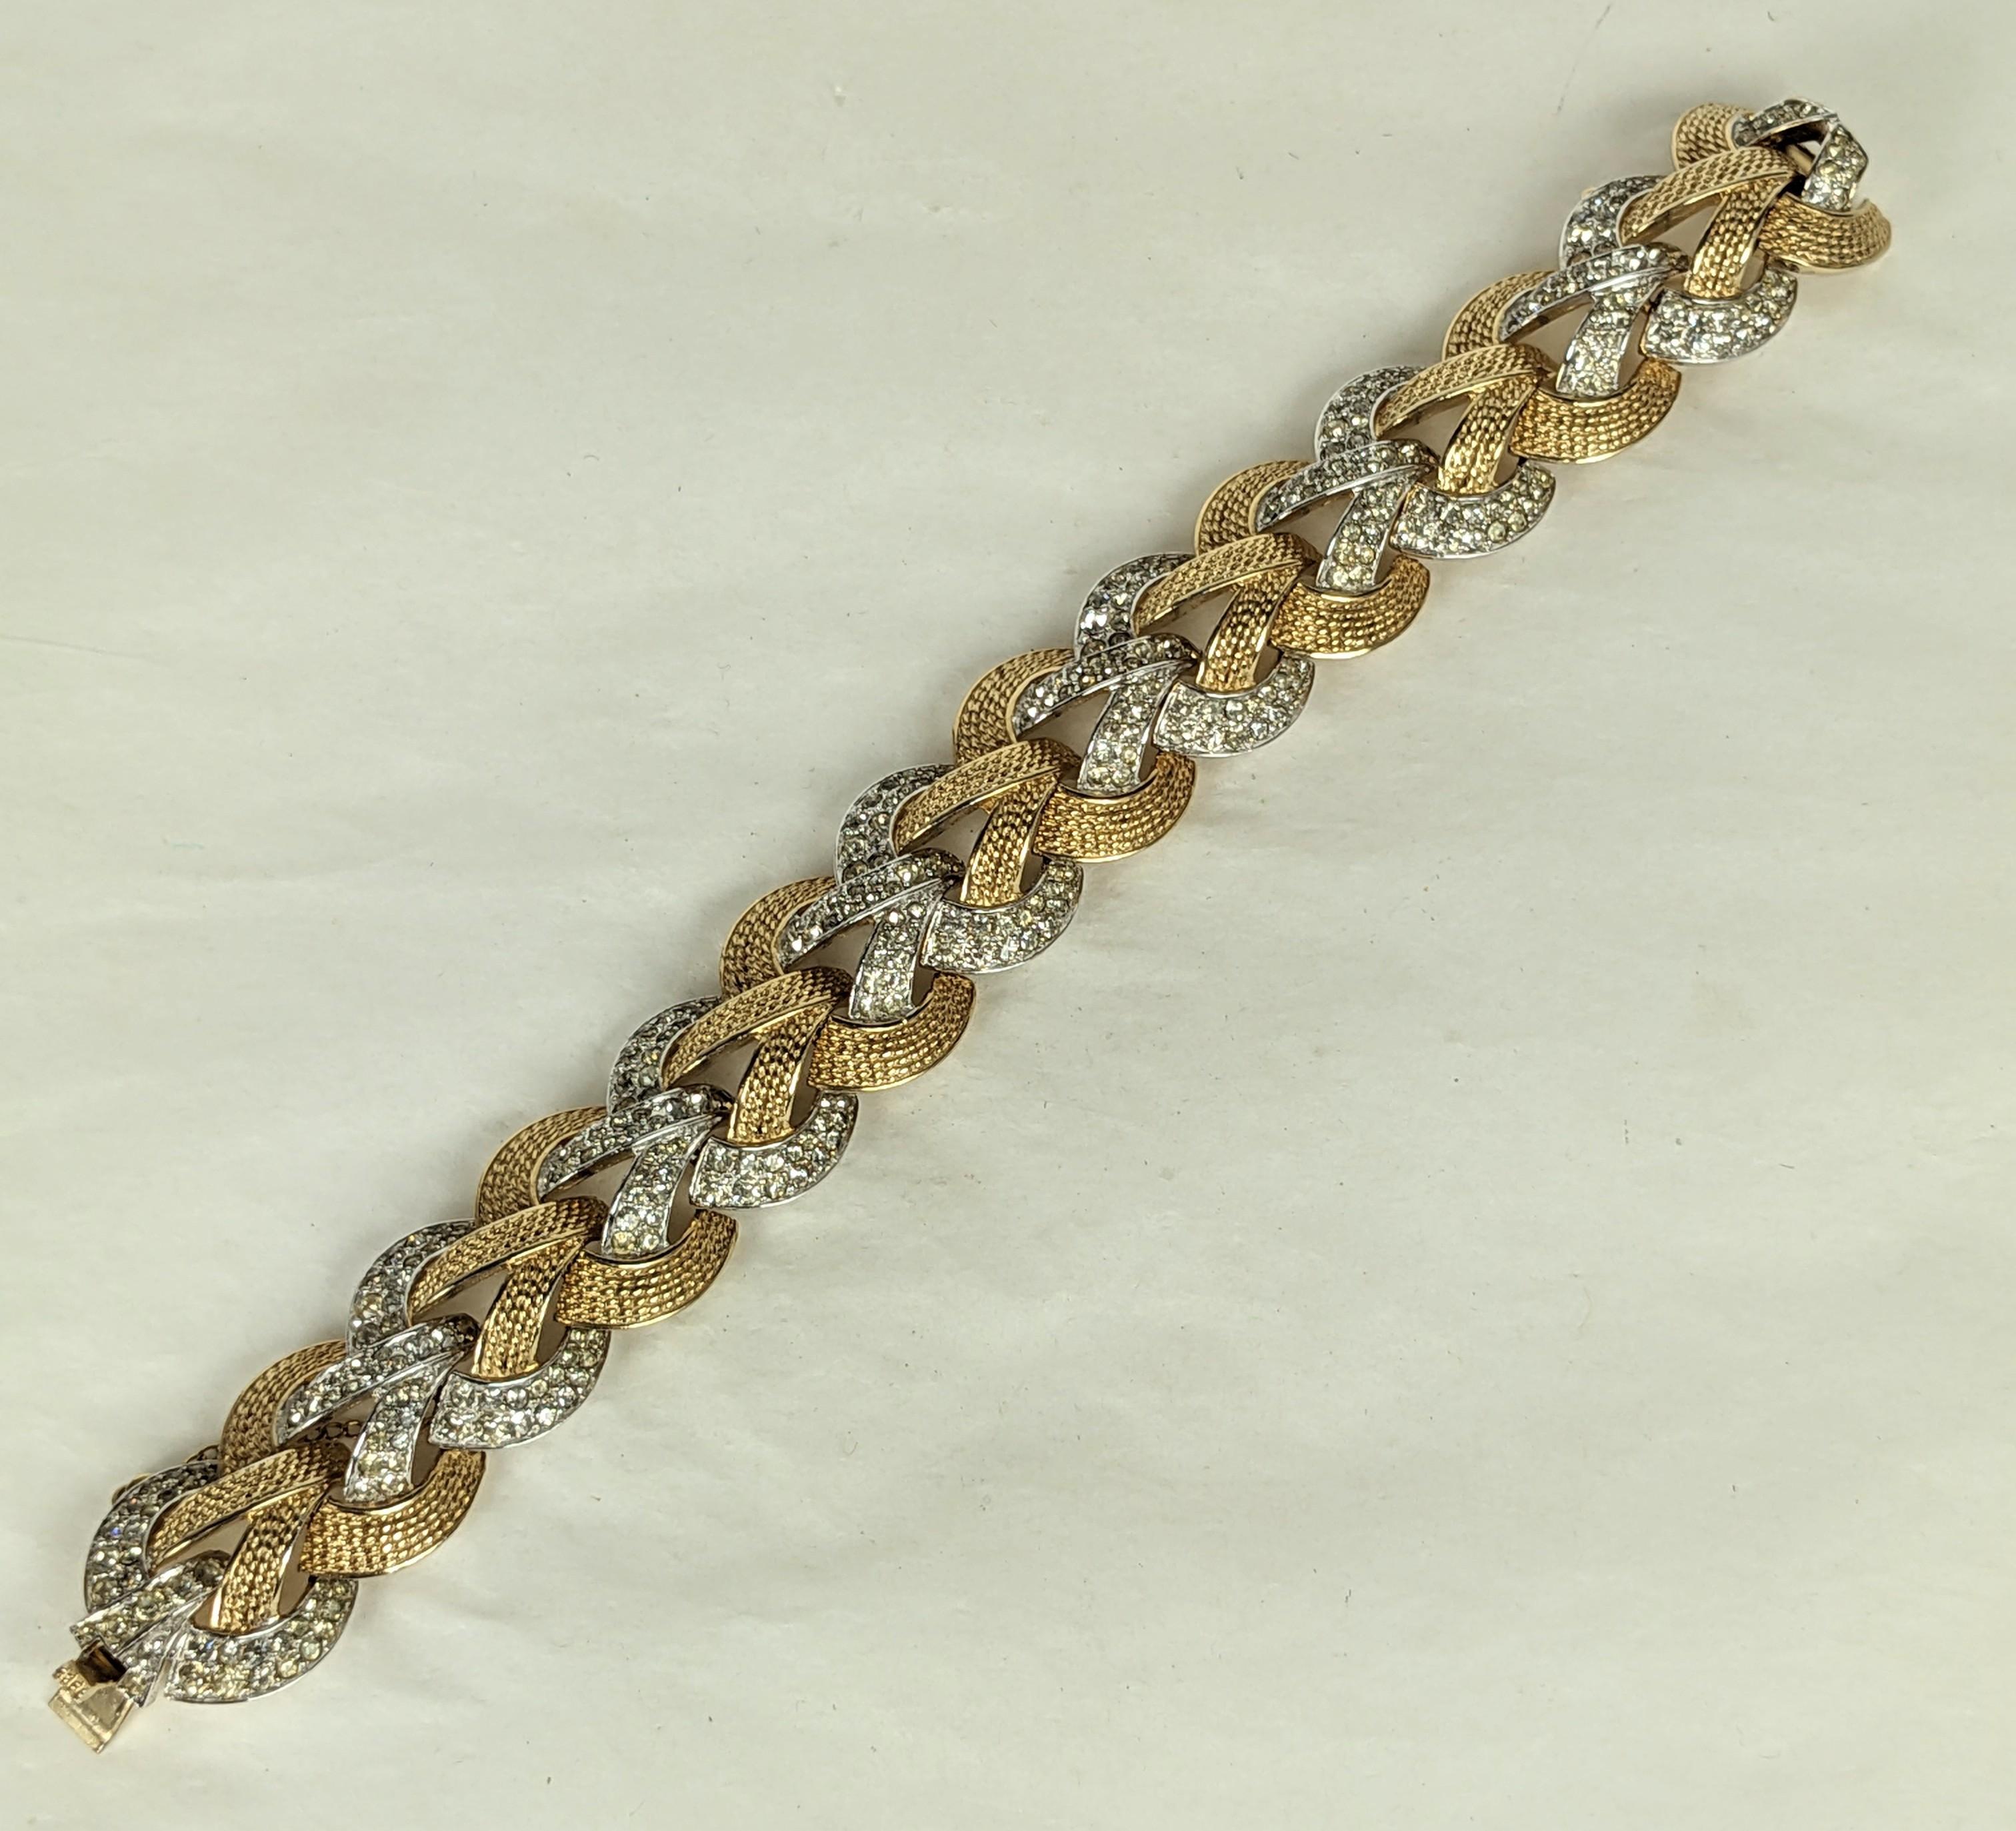 Attractive Marcel Boucher Gilt and Pave Overlap Link Bracelet of overlapping motifs of gilt metal and pave crystals. Dimensional and striking design. 8.25